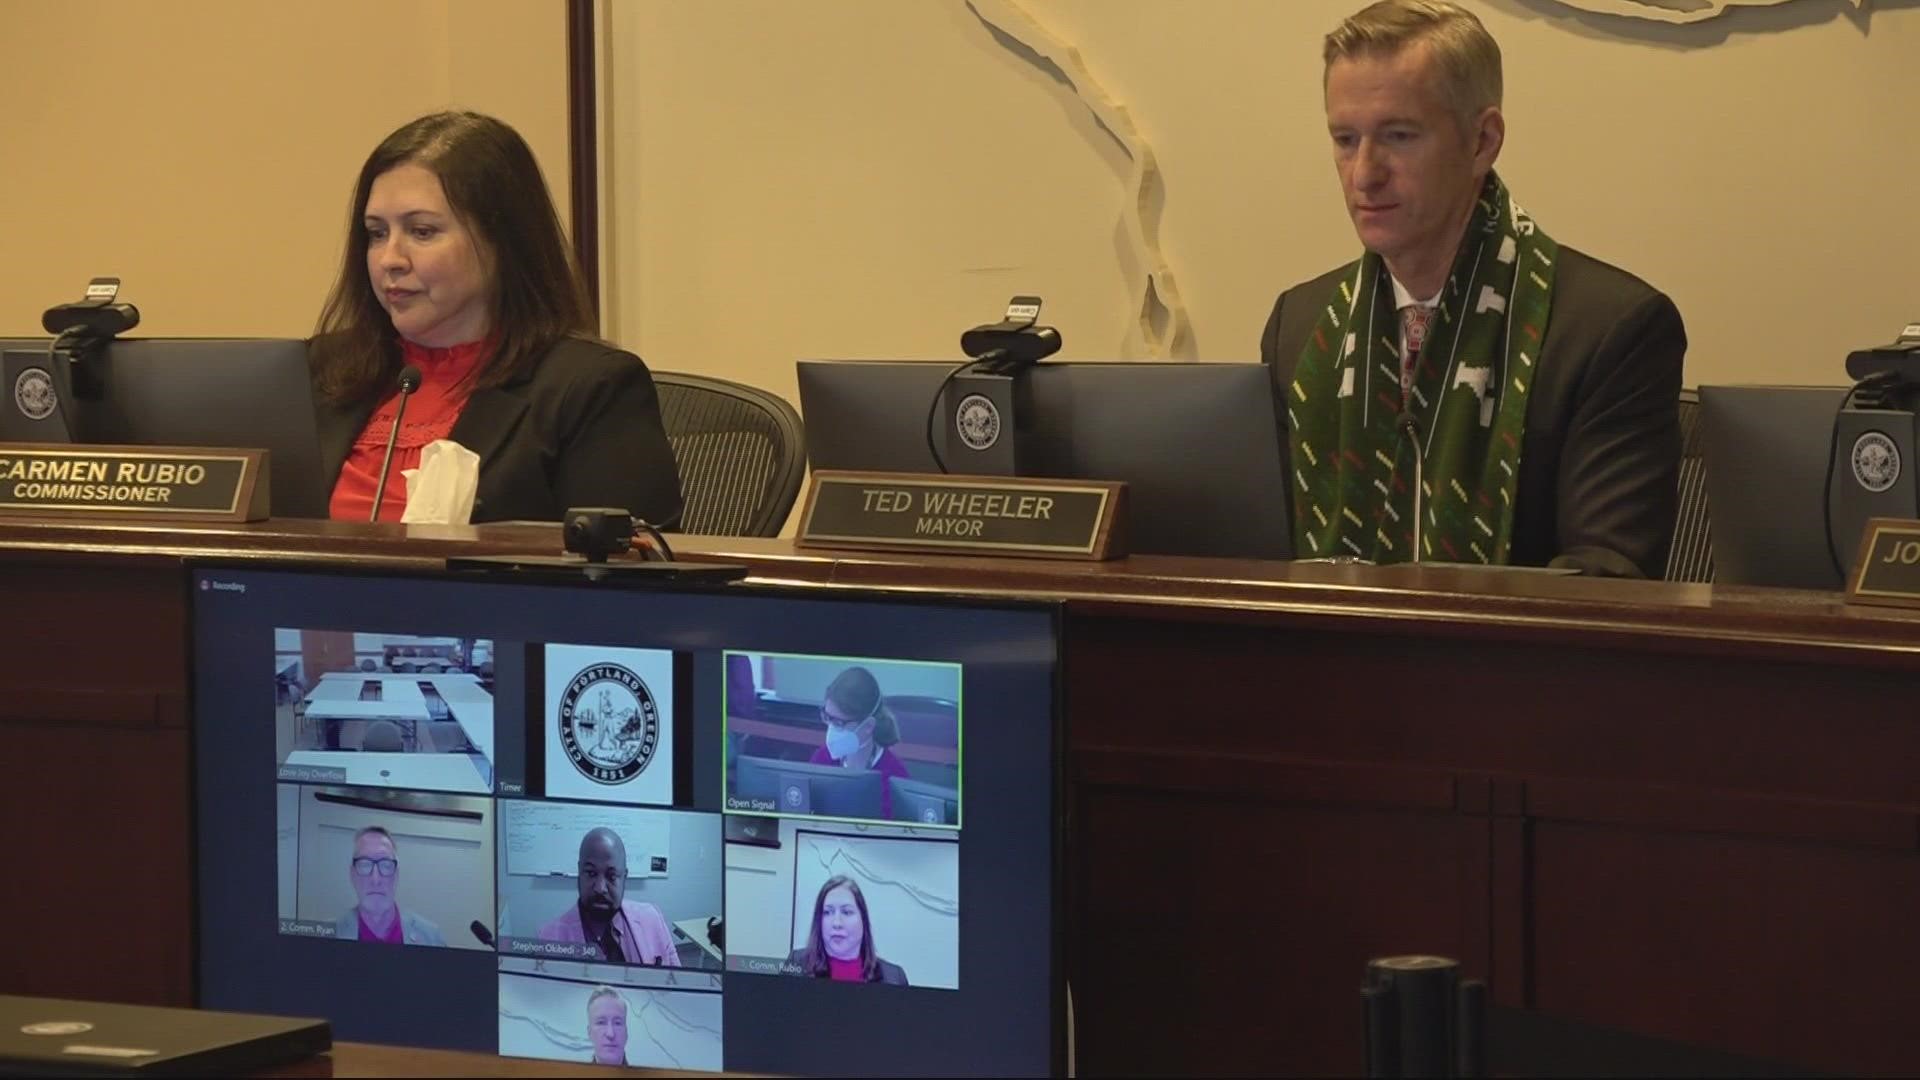 For the first time in two years, in-person city council meetings have resumed in the city of Portland. KGW's Bryant Clerkley has the update.